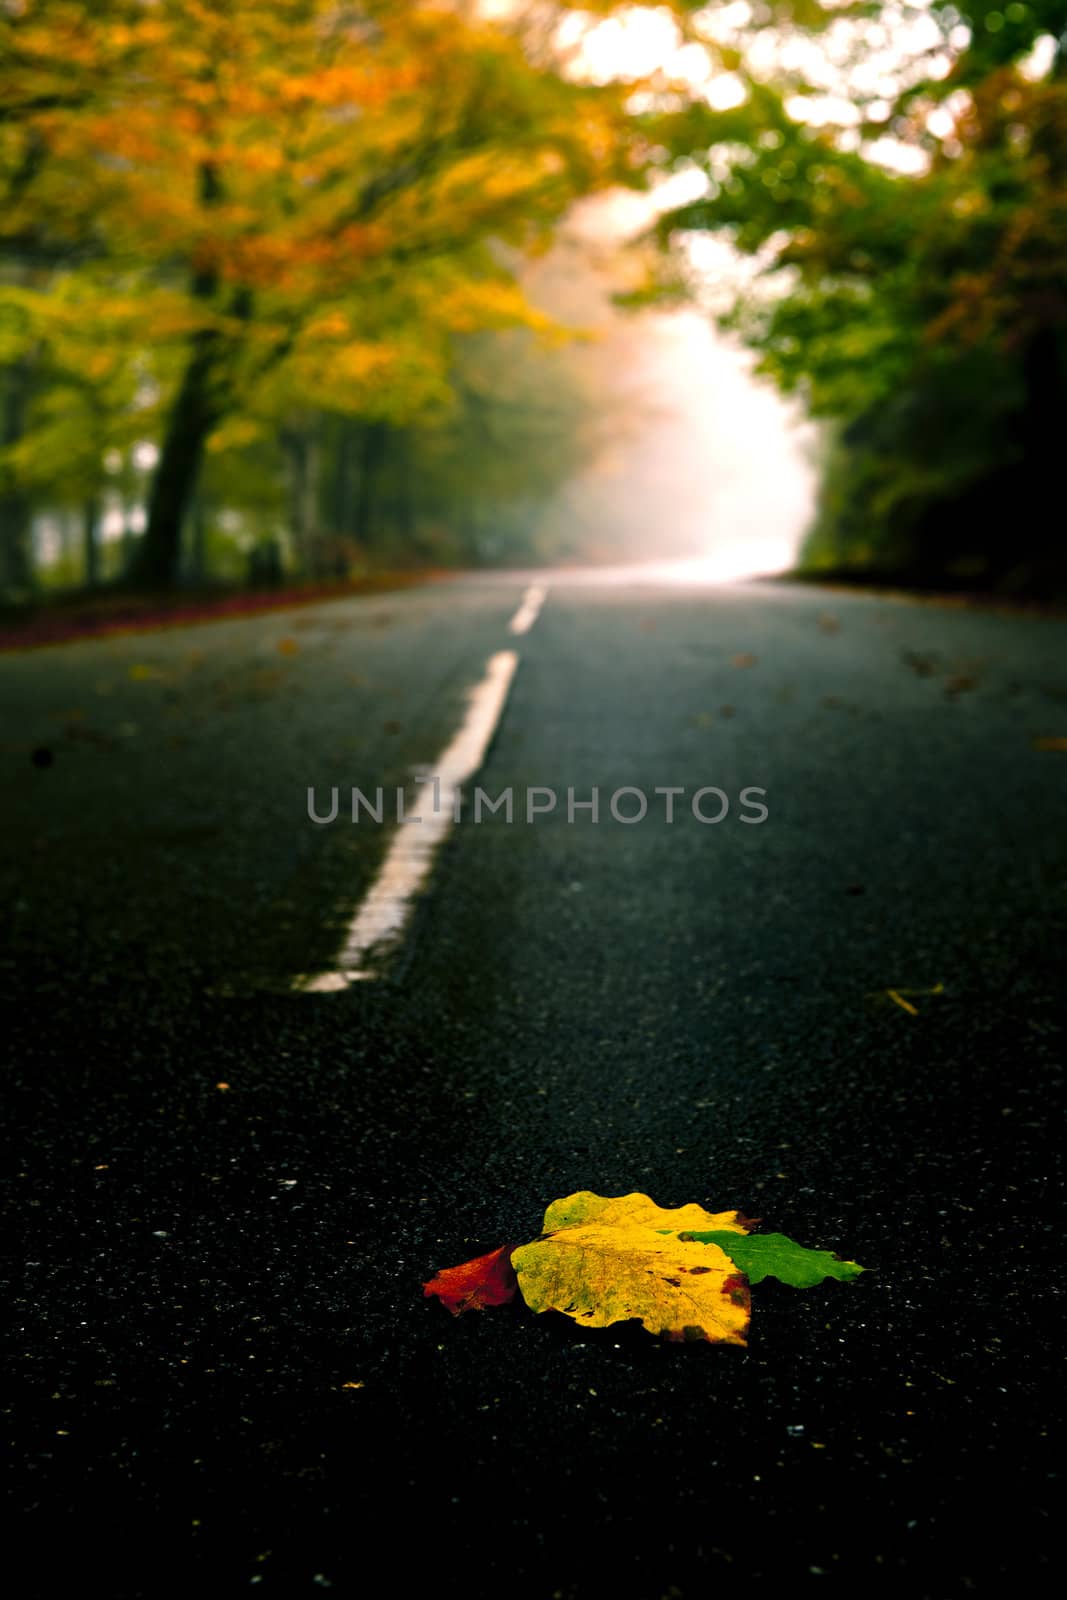 Leafs on the road by Iko